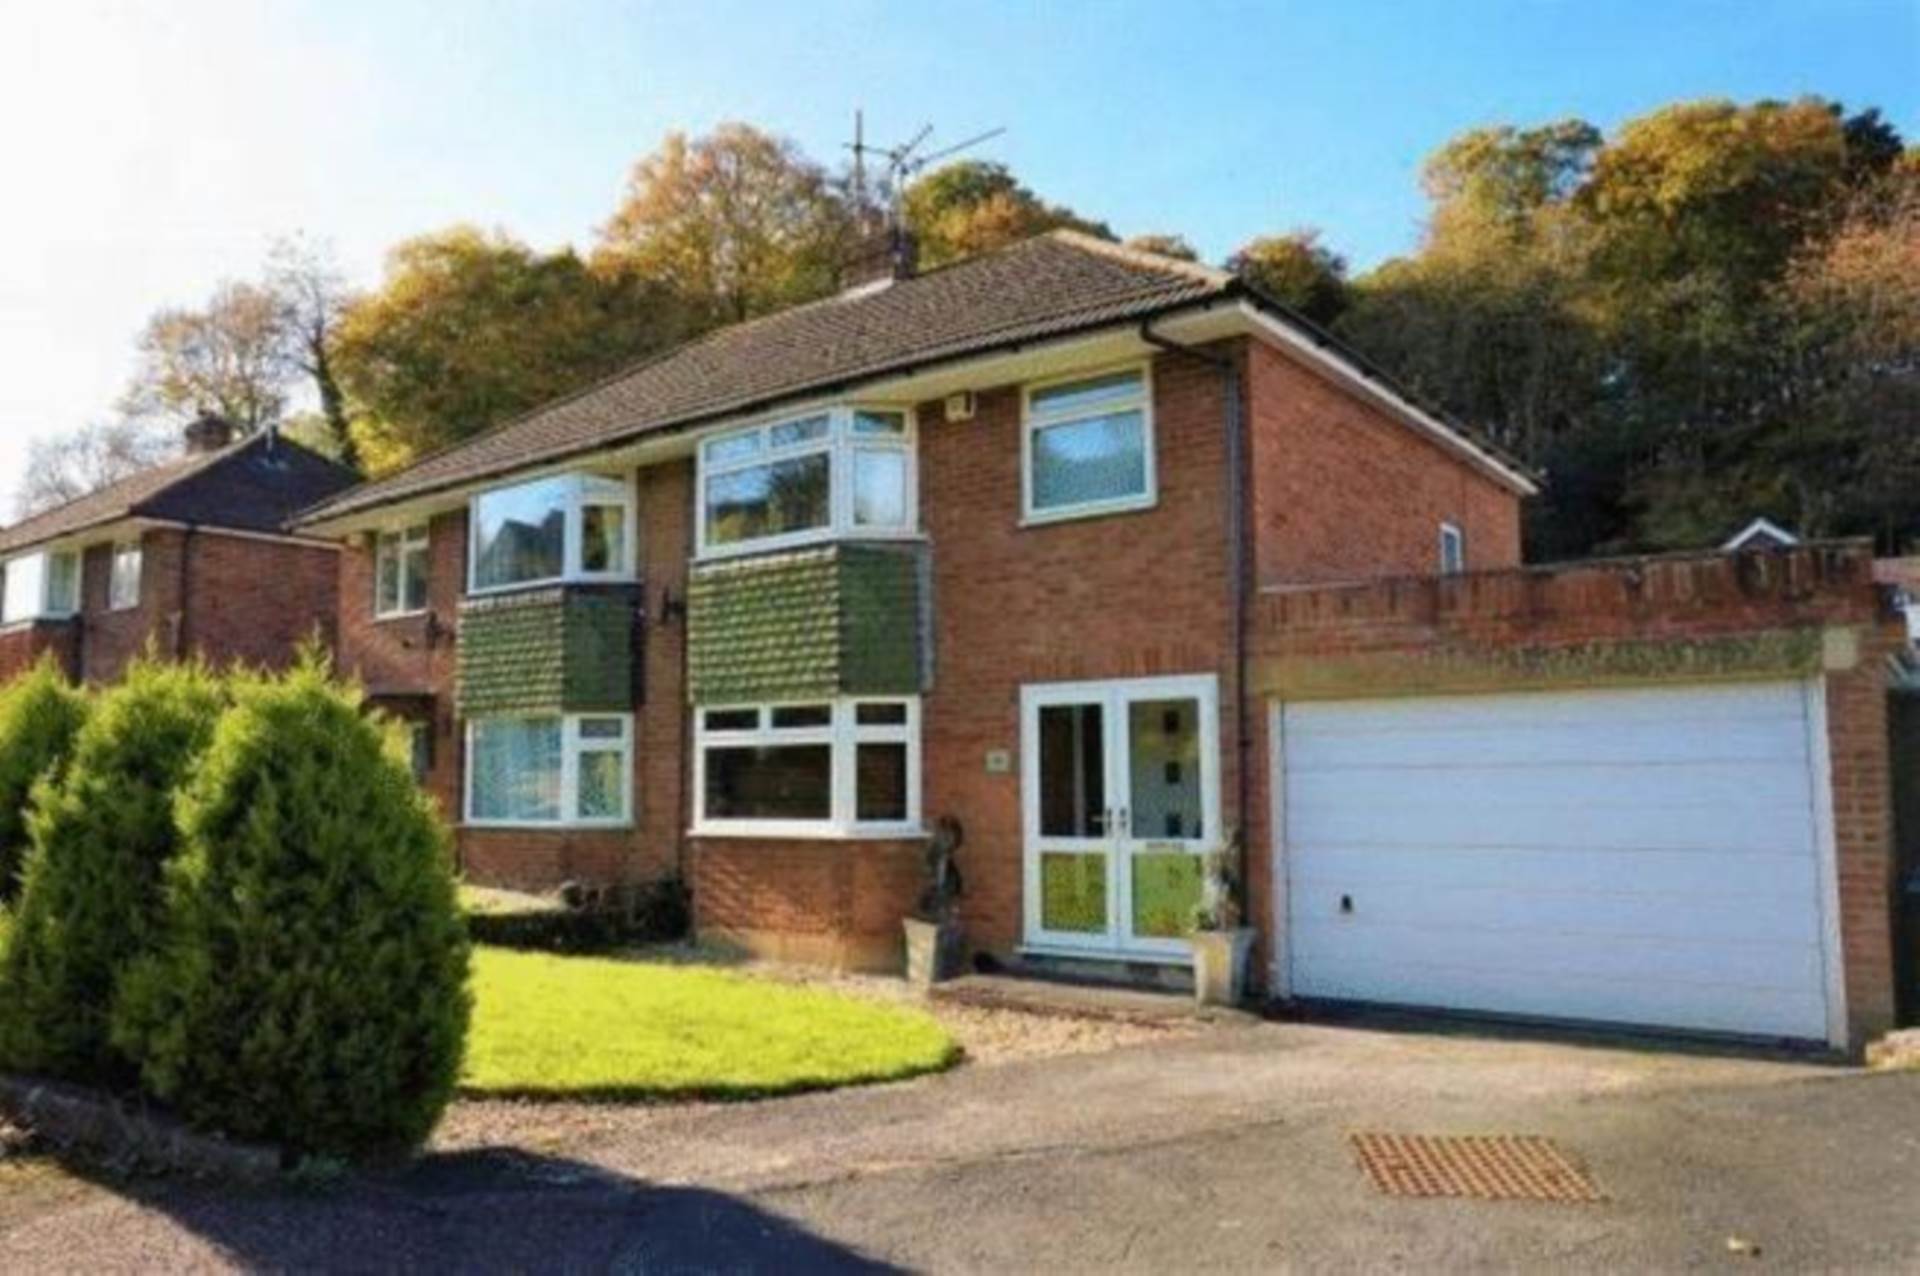 3 bed Semi-Detached House for rent in High Wycombe. From Eden Sales & Lettings - High Wycombe